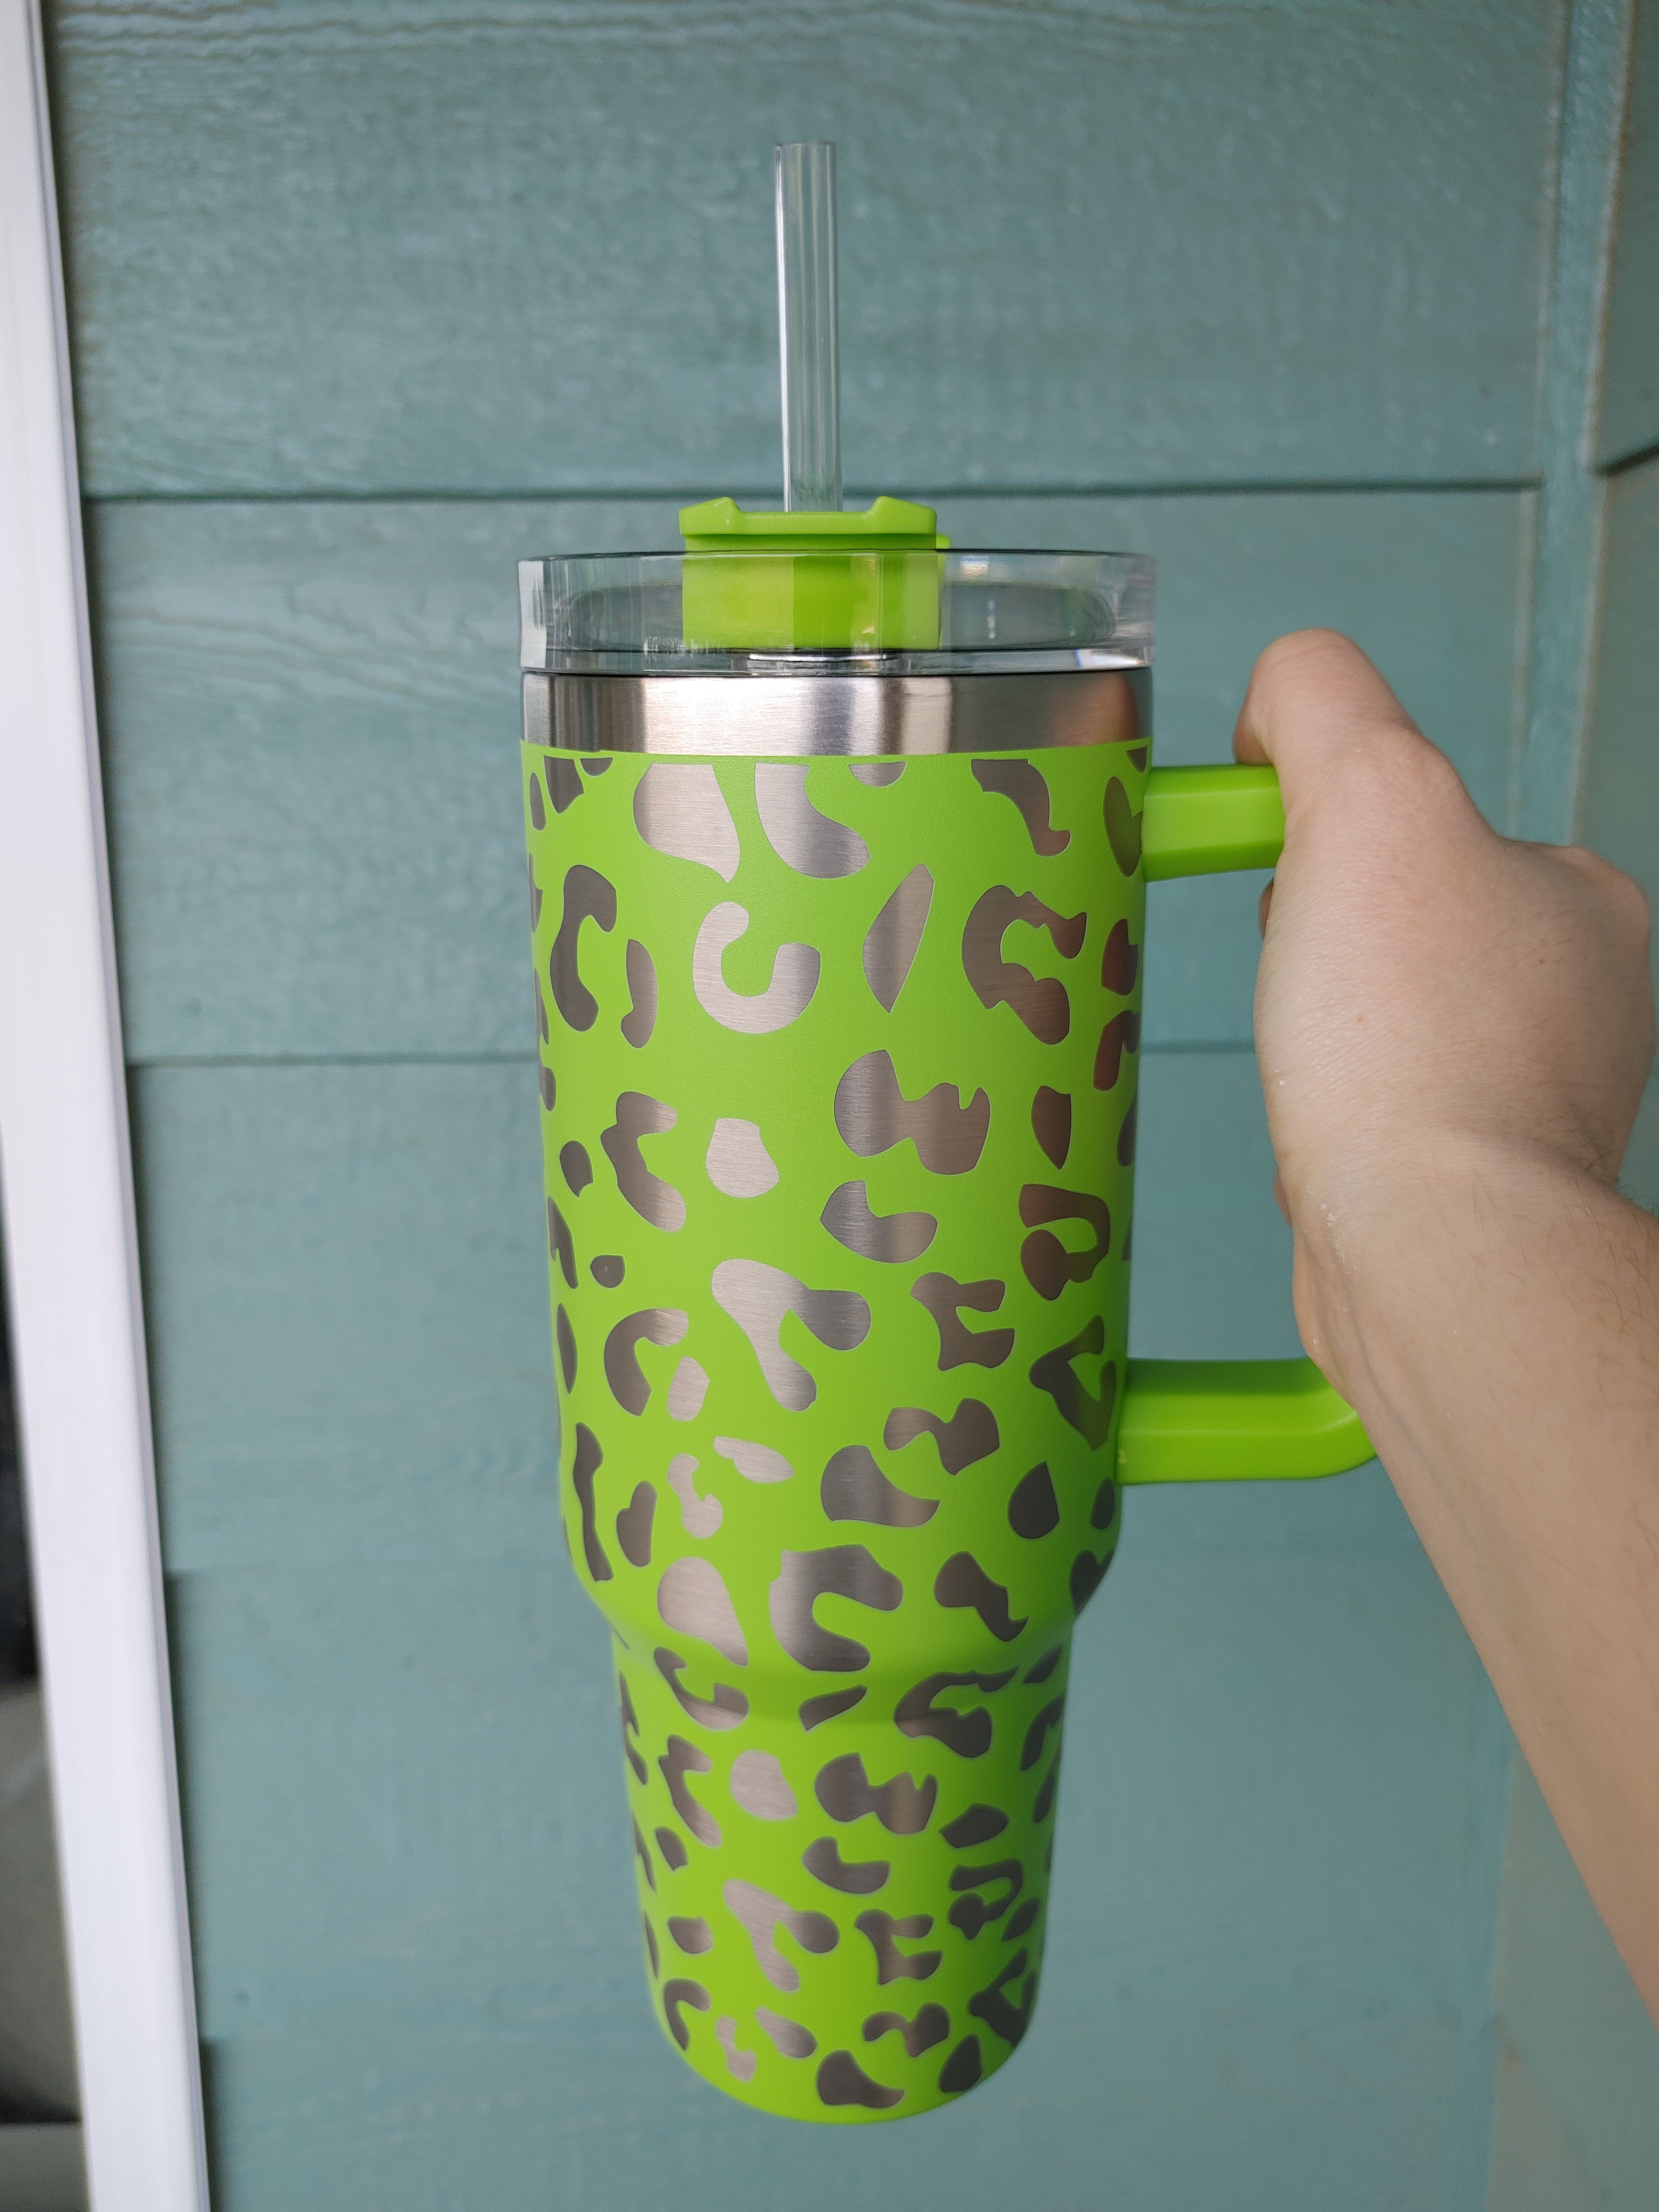 Stanley Tumbler 4O Oz Leopard Stanley Dupe On Sale - Stylish